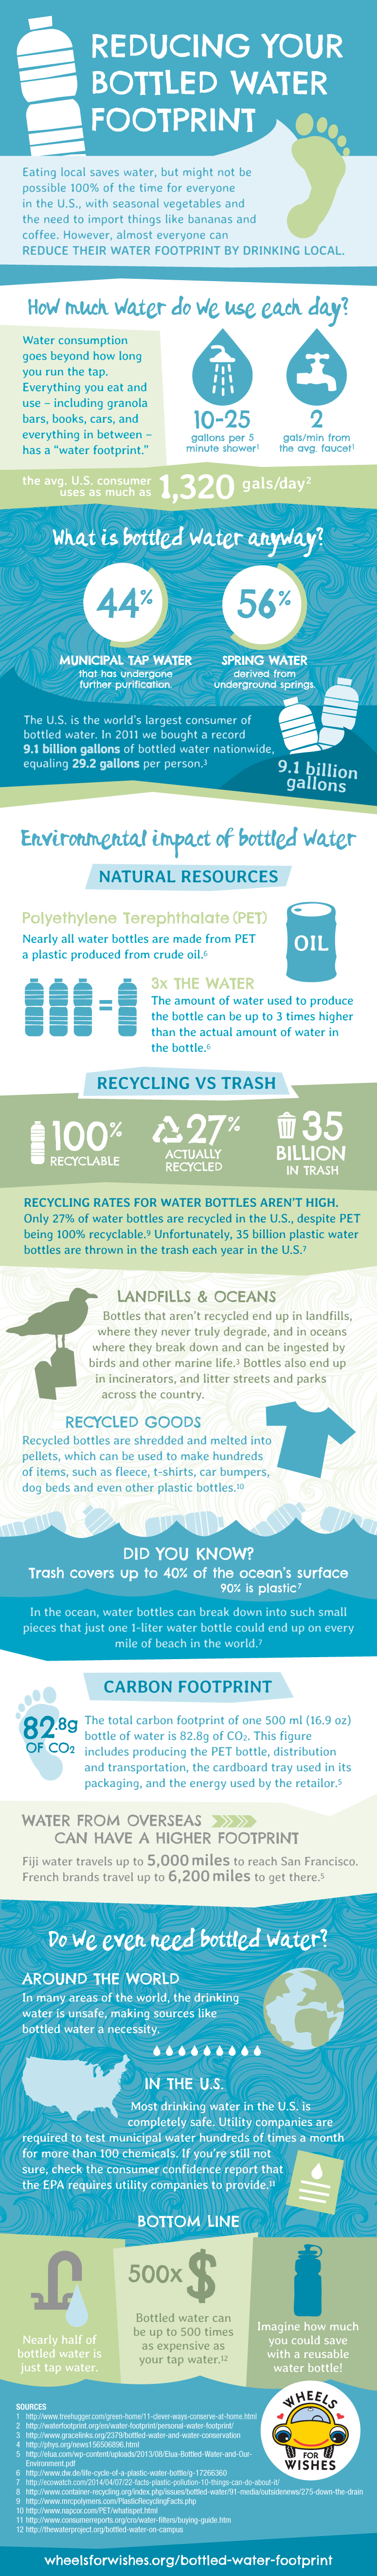 reduce-your-water-footprint-infographic